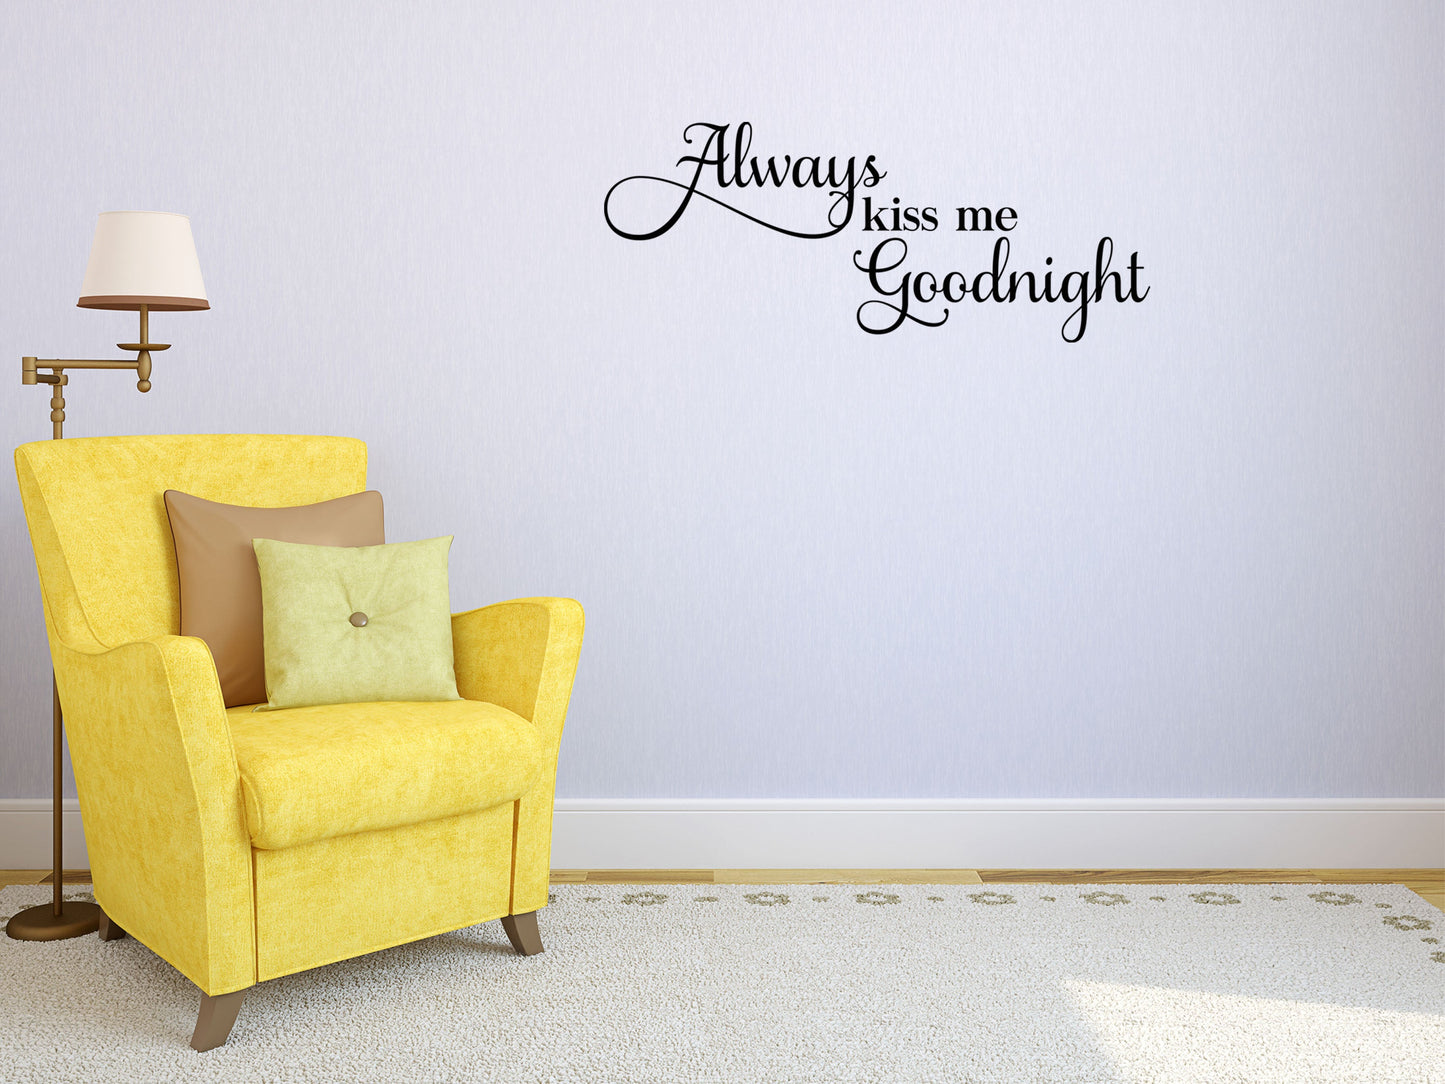 Kiss Me Goodnight - Inspirational Wall Decals Vinyl Wall Decal Done 